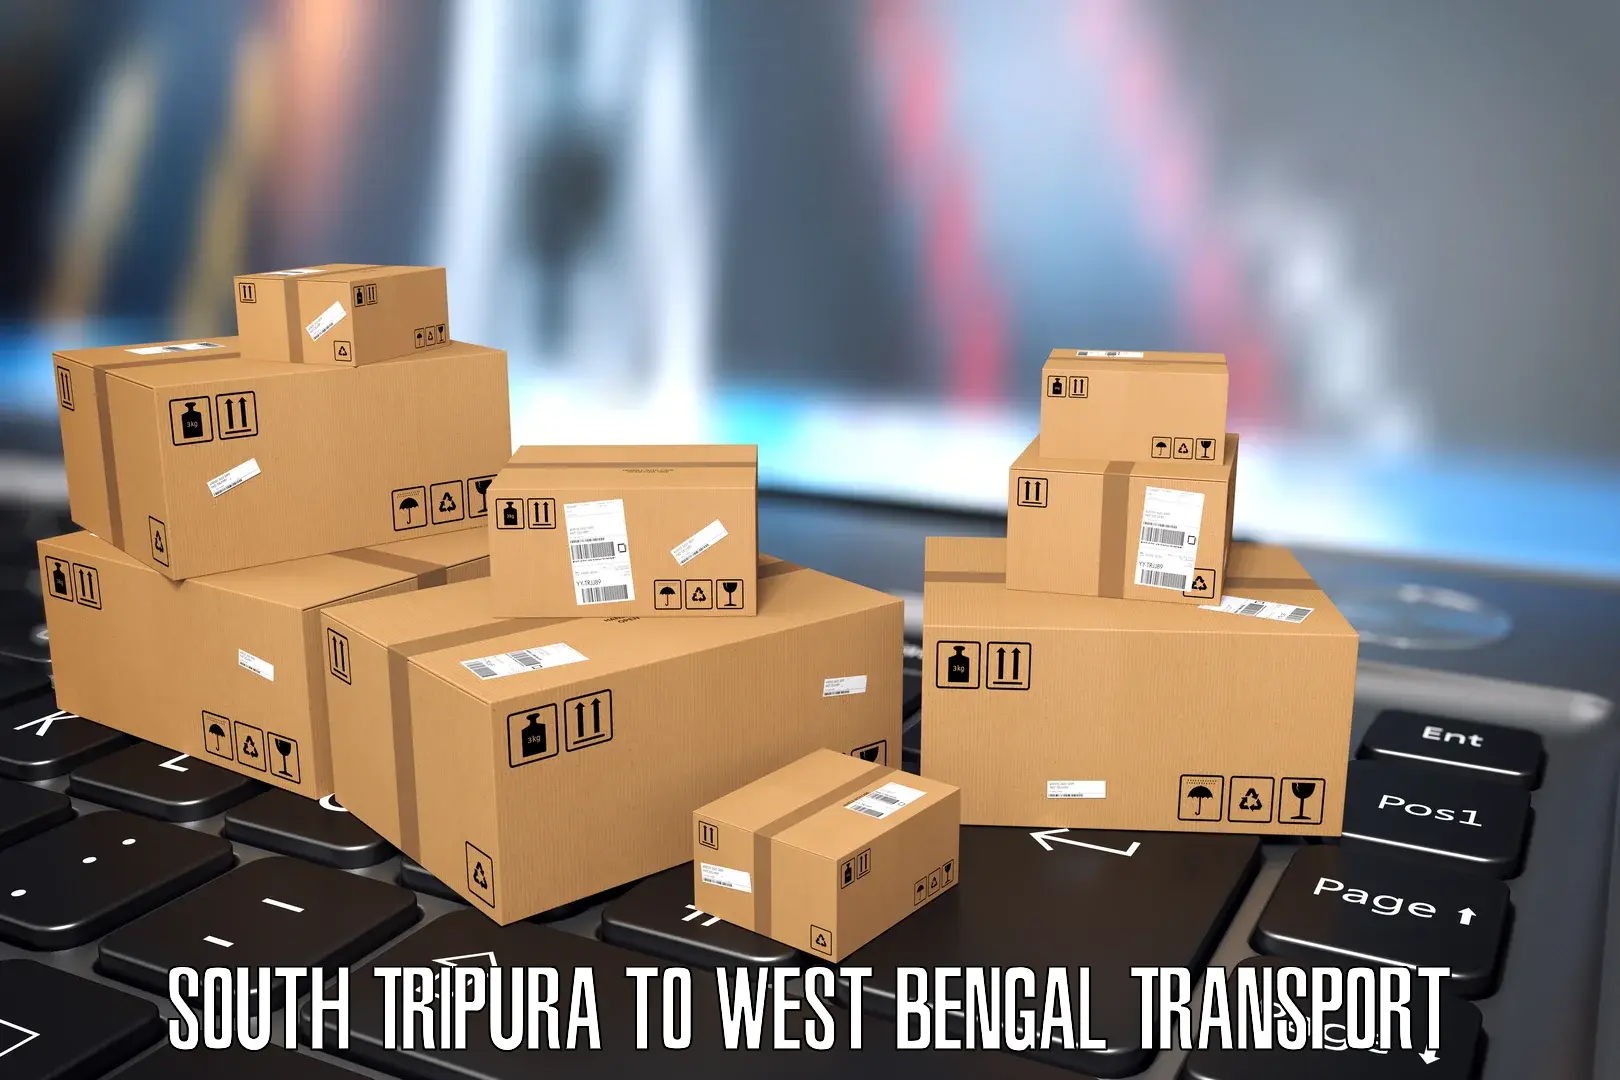 Daily transport service South Tripura to Rampurhat